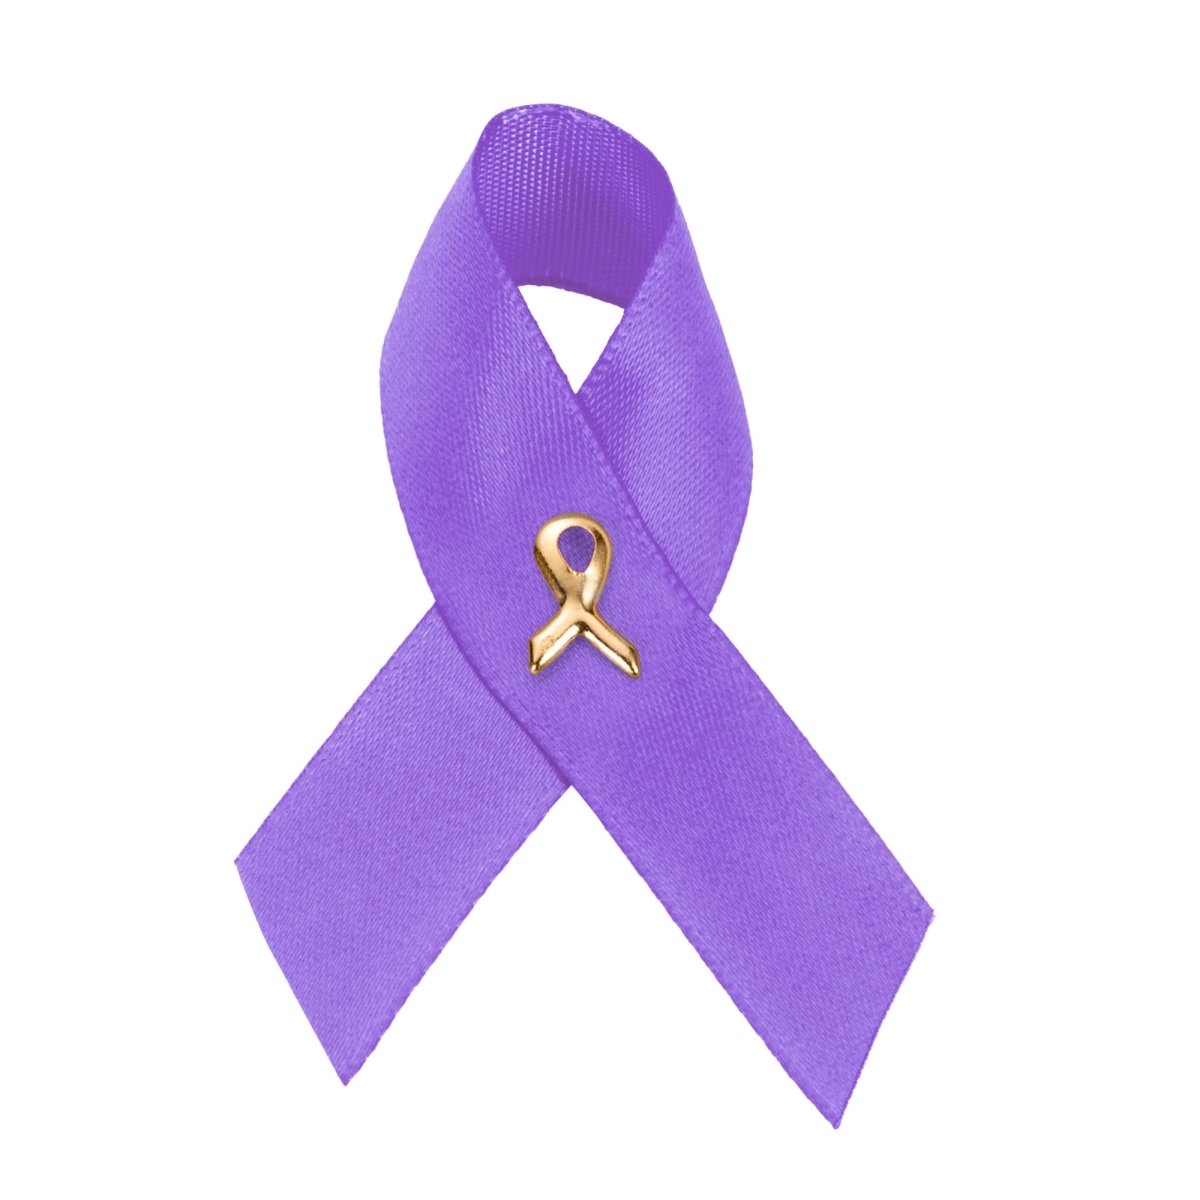 Cystic Fibrosis Awareness Purple Satin Ribbon Pins - Fundraising For A Cause